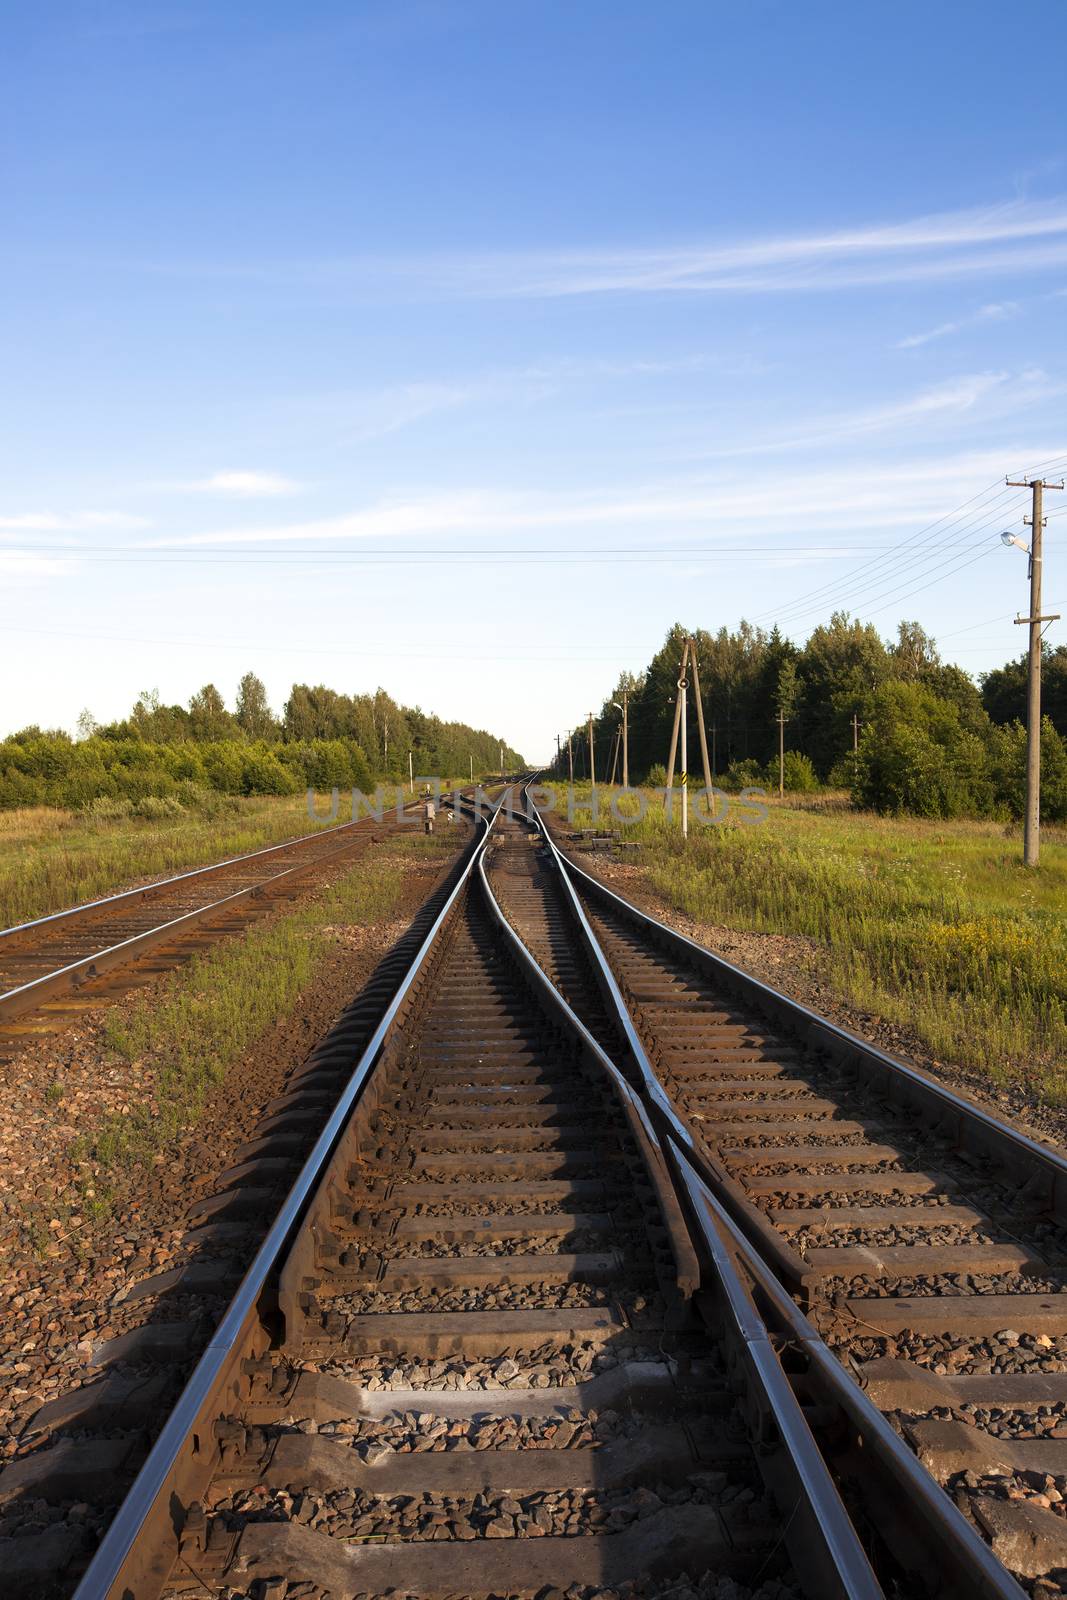  rails of the railway which are crossing with each other. Belarus